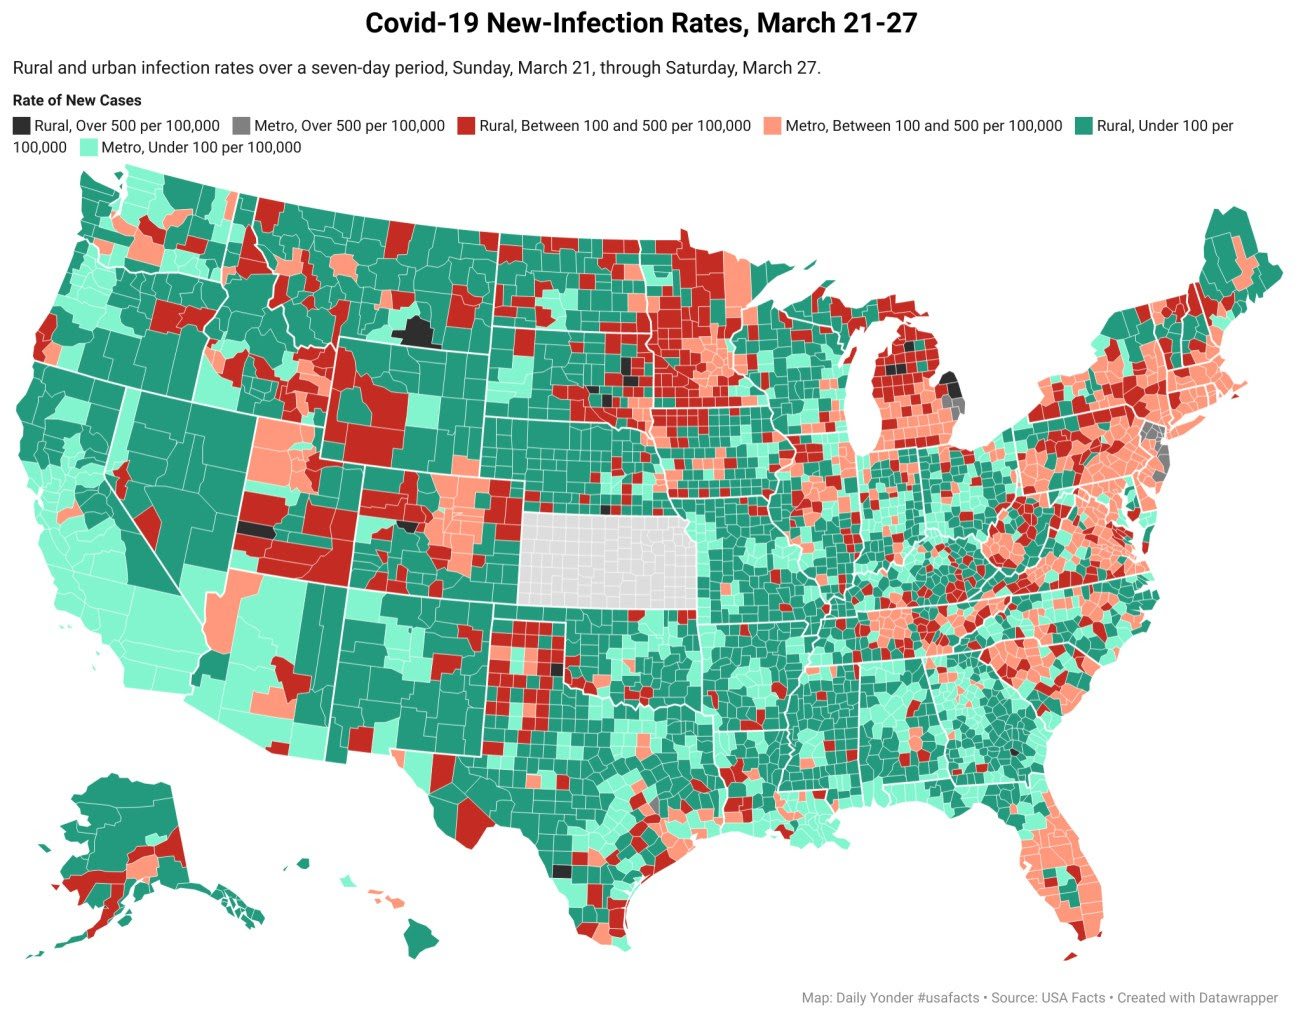 LEDE-covid-19-new-infection-rates-march-21-27-nbsp--1296x1019.jpg